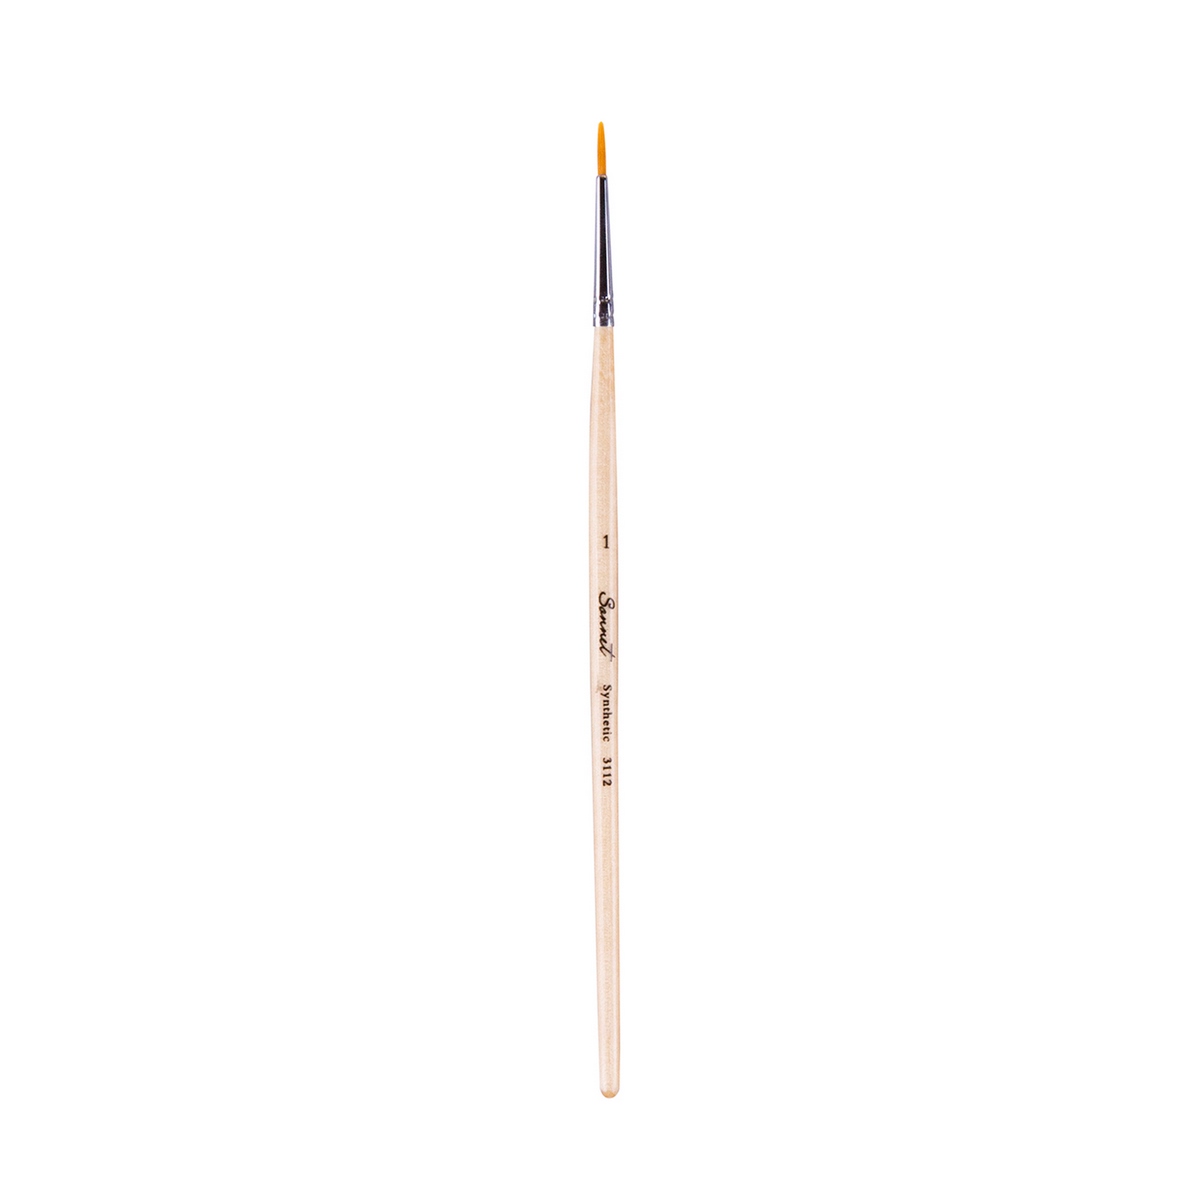 Synthetic brushes "Sonnet", round, short handle